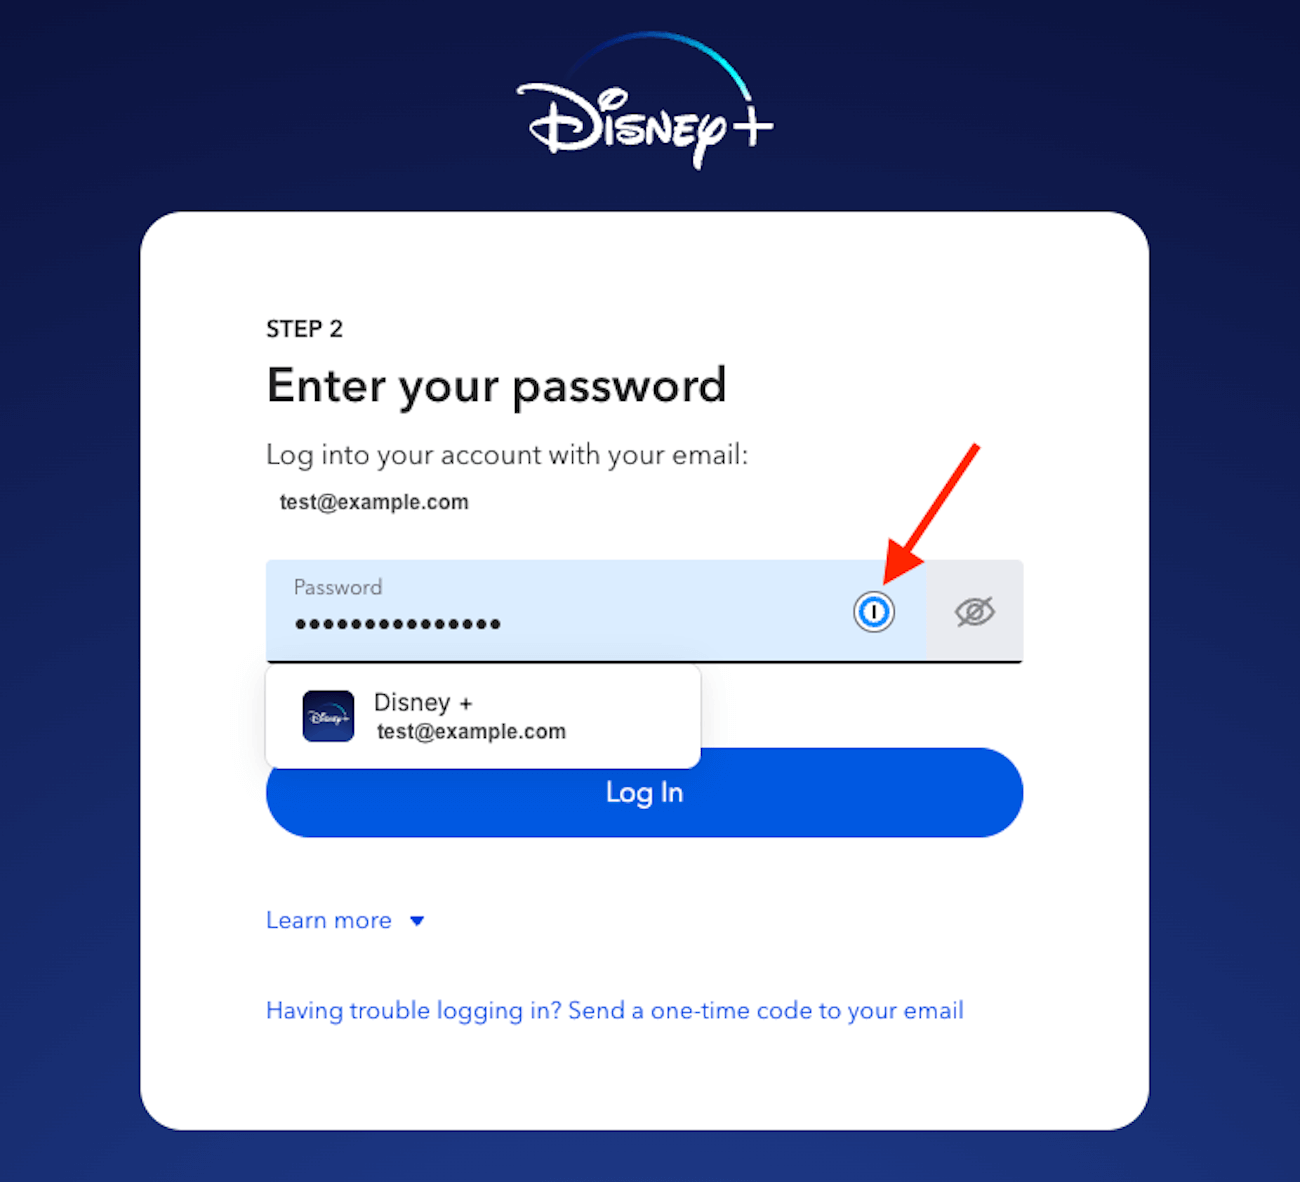 1Password offering to autofill a password on the sign-in page for Disney+.